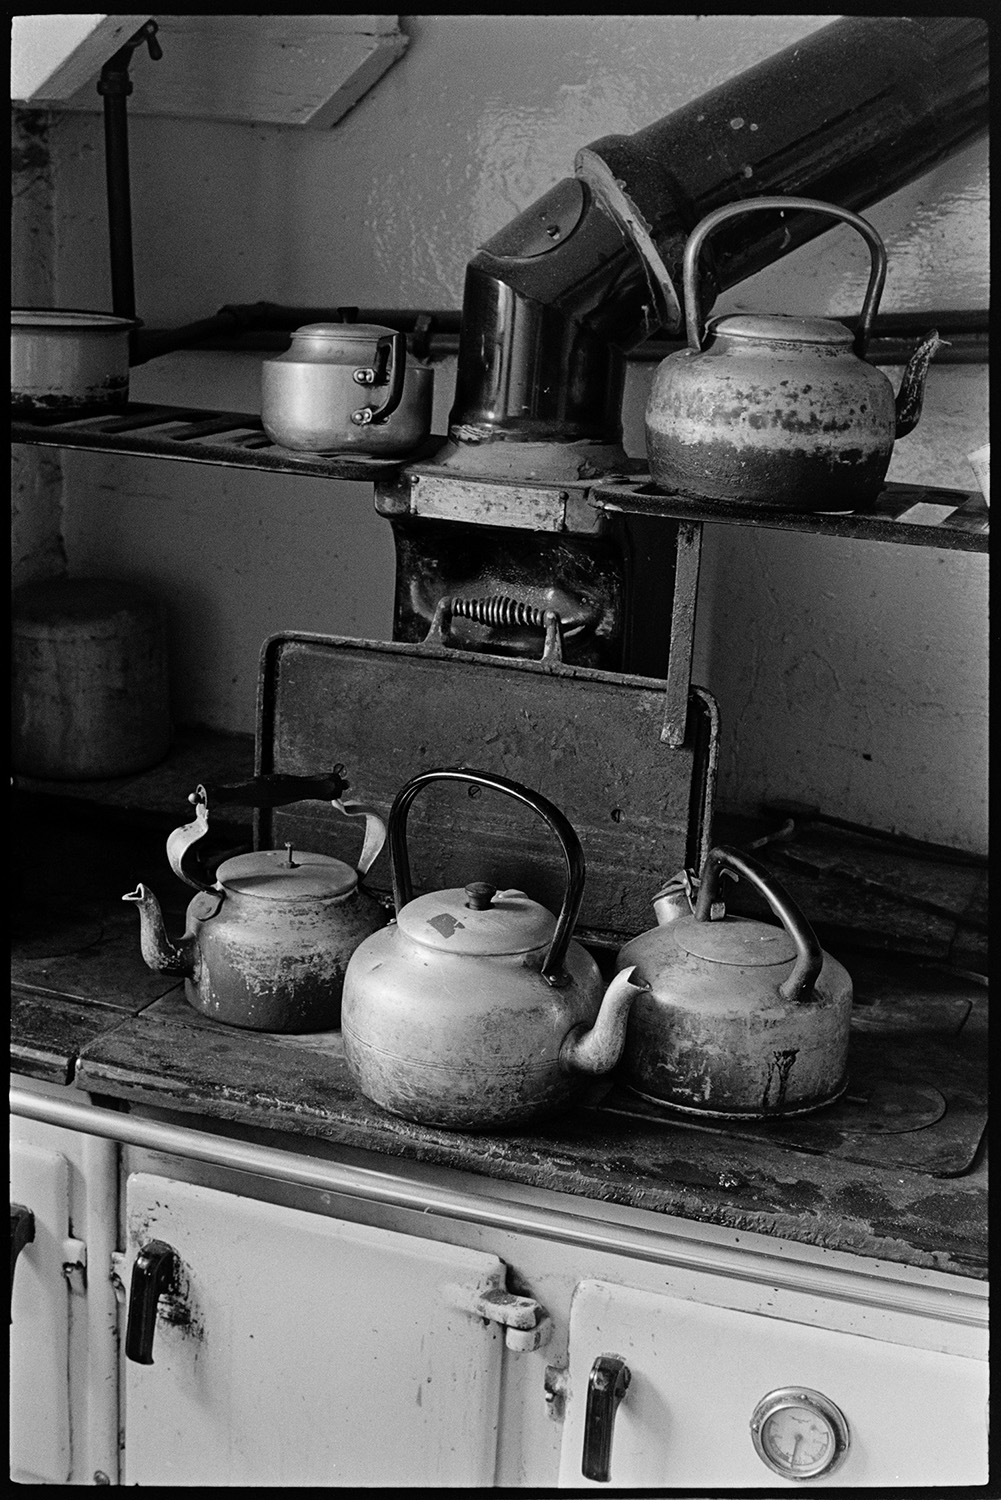 Rayburn stove with kettles on hotplate. 
[Three kettles on the hotplate of a rayburn stove in a kitchen in a house in Brendon Barton. Other kettles are positioned on a rack above the stove.]